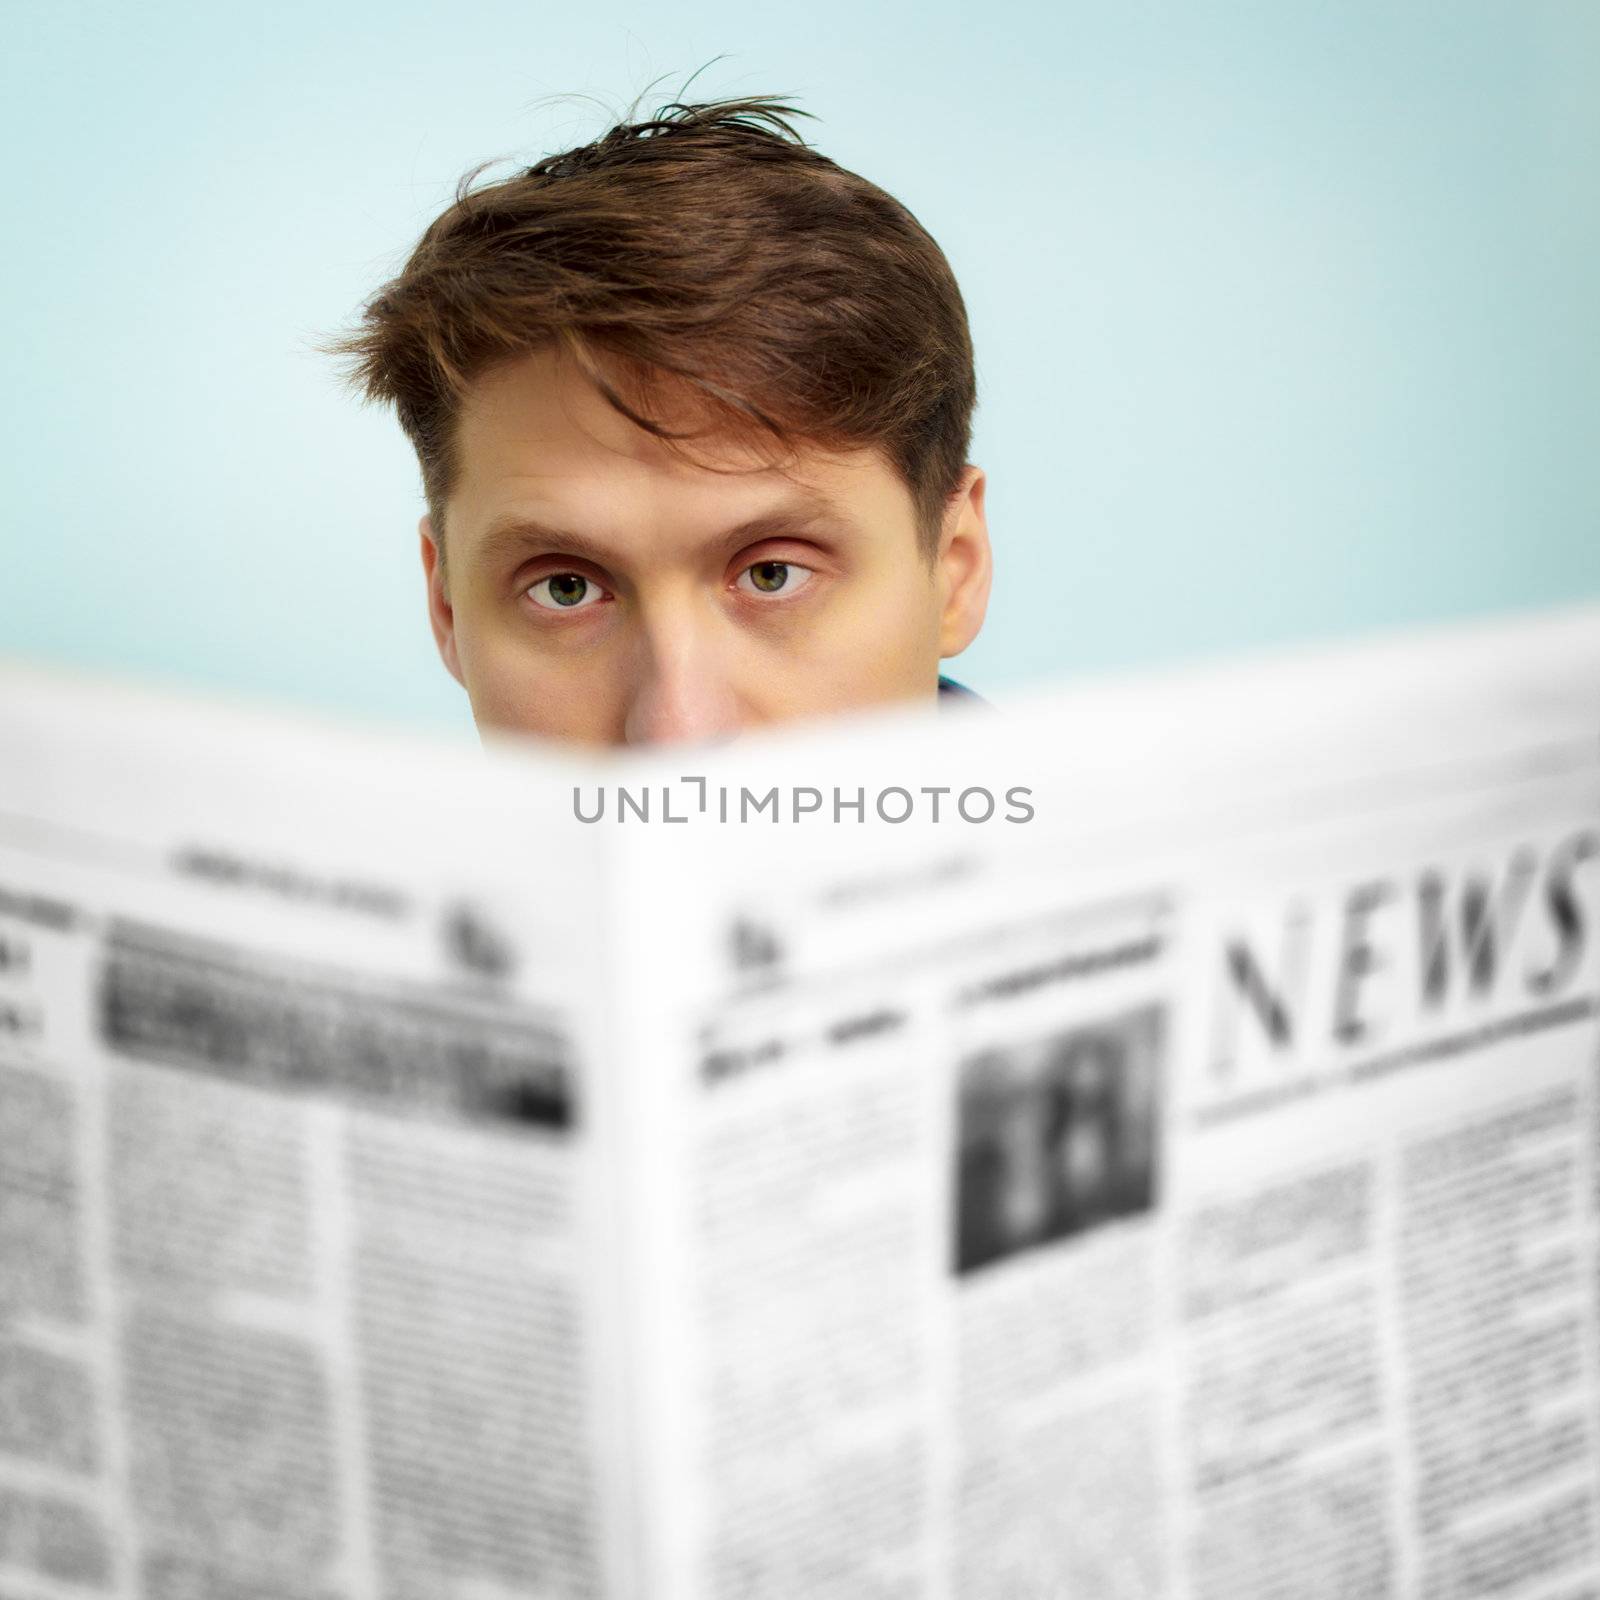 Man reads news in the newspaper by pzaxe